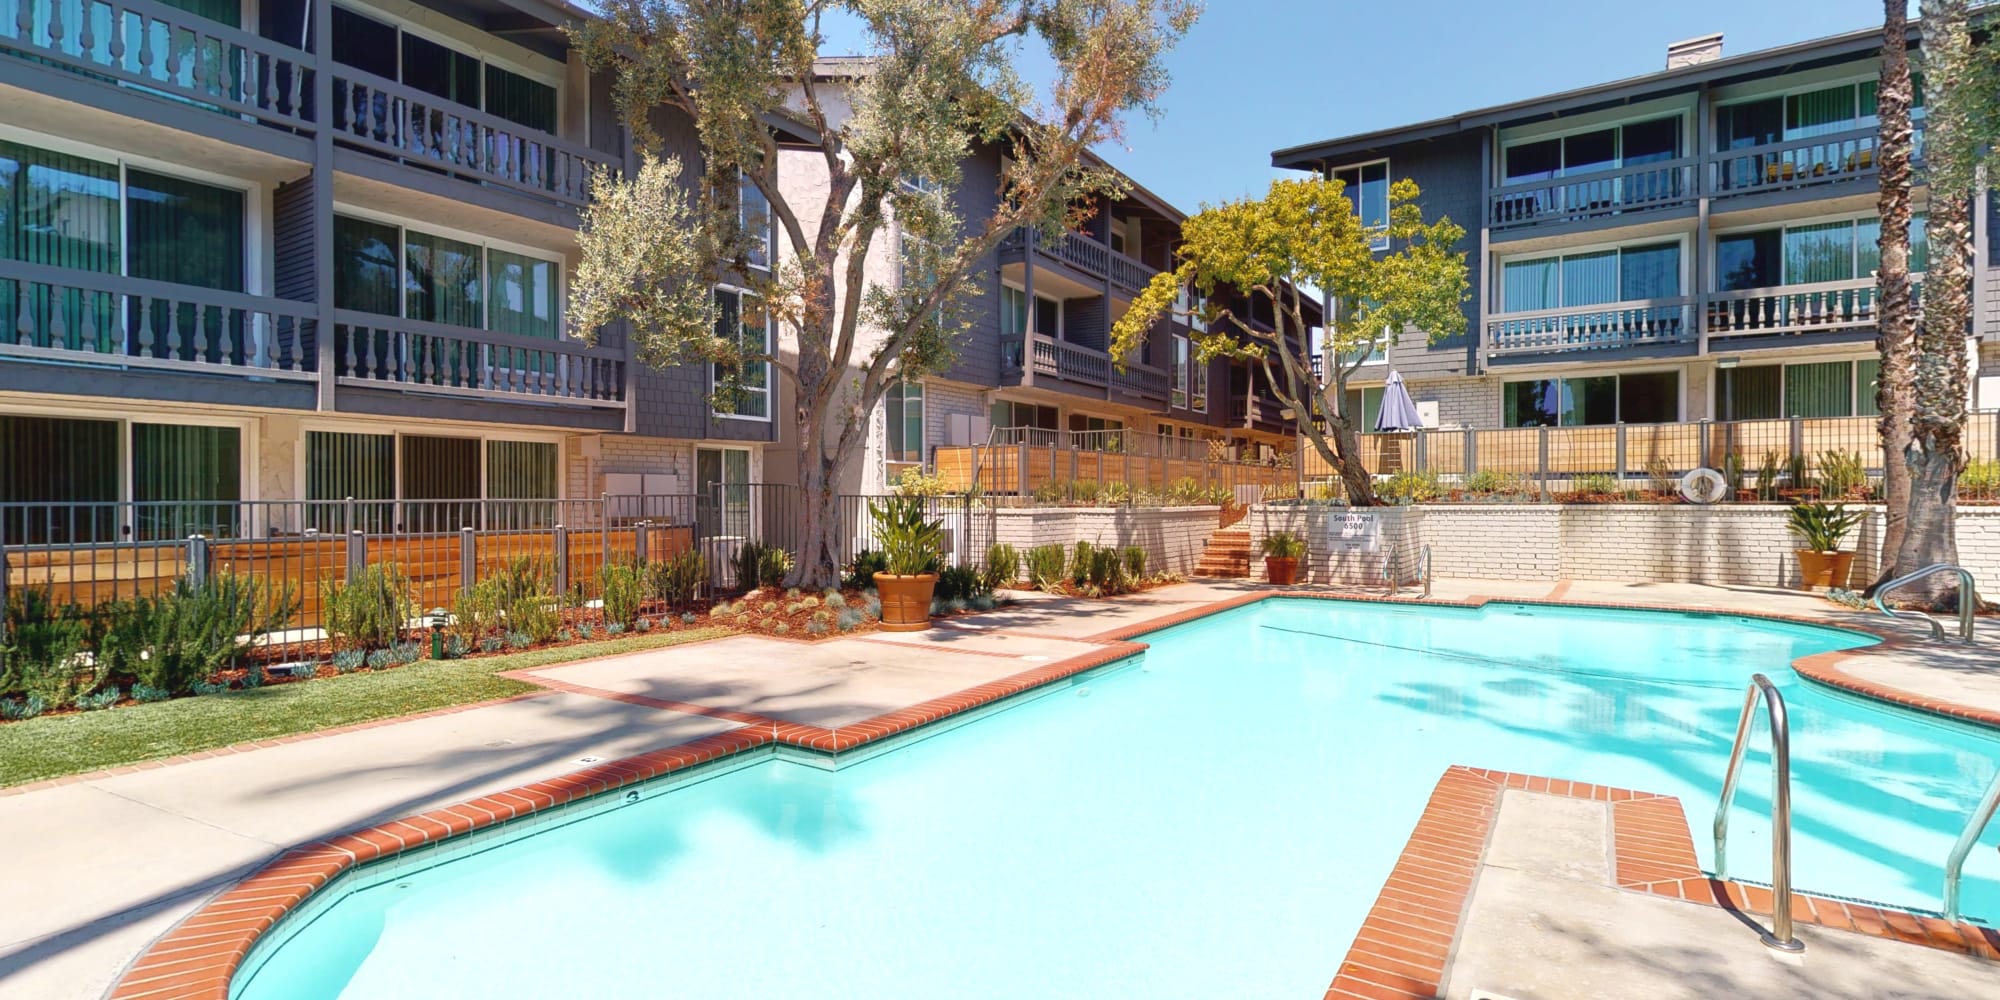 Renovated apartment community with mature trees and sparkling pool at The Meadows in Culver City, California